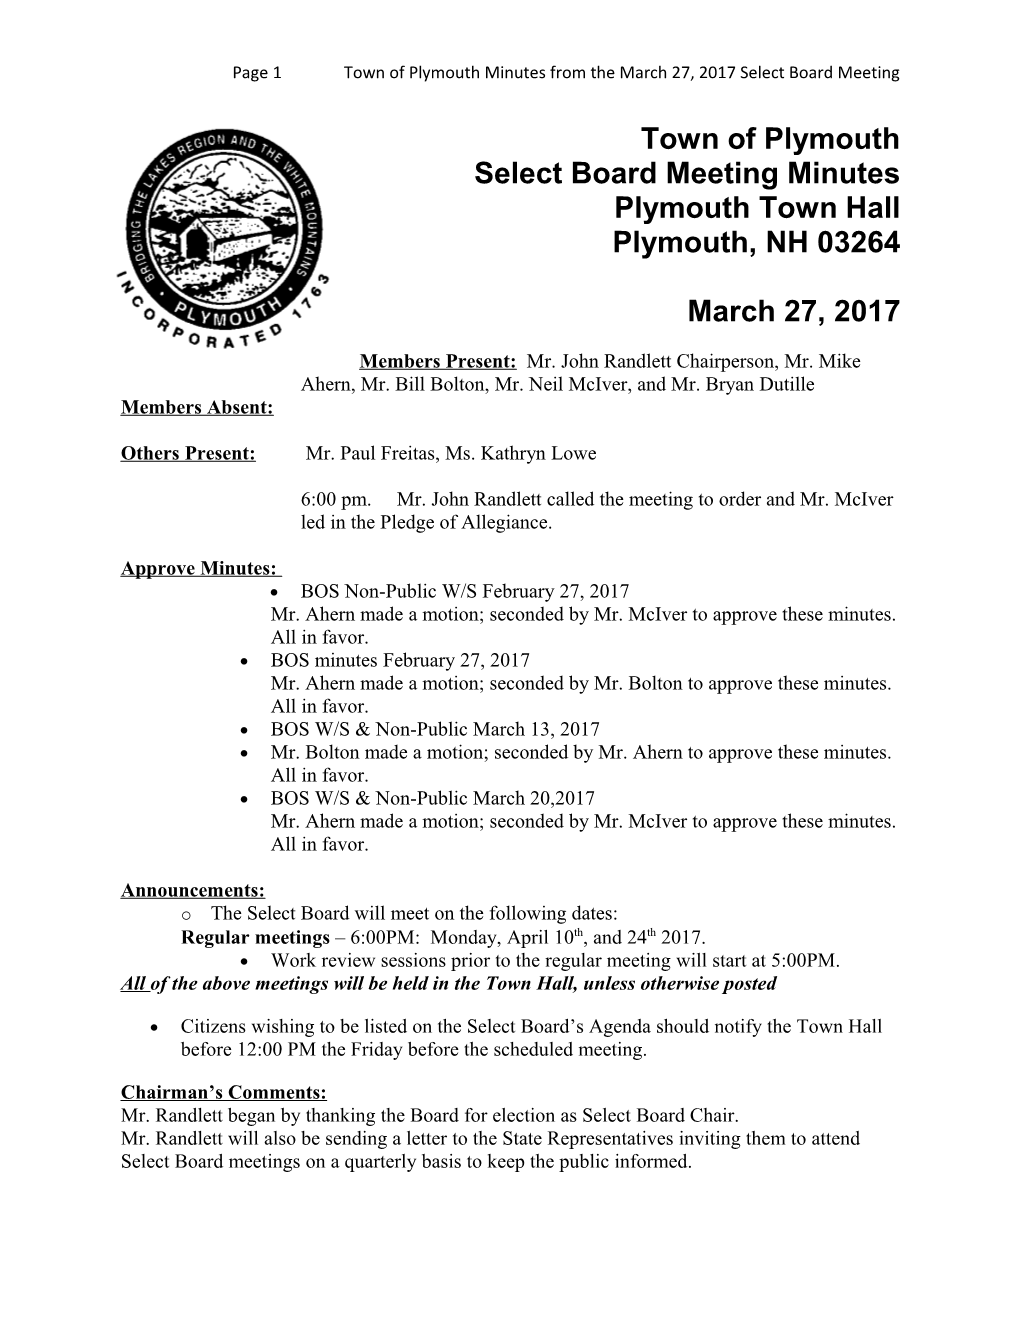 Page 1Town of Plymouth Minutes from Themarch 27, 2017 Select Board Meeting